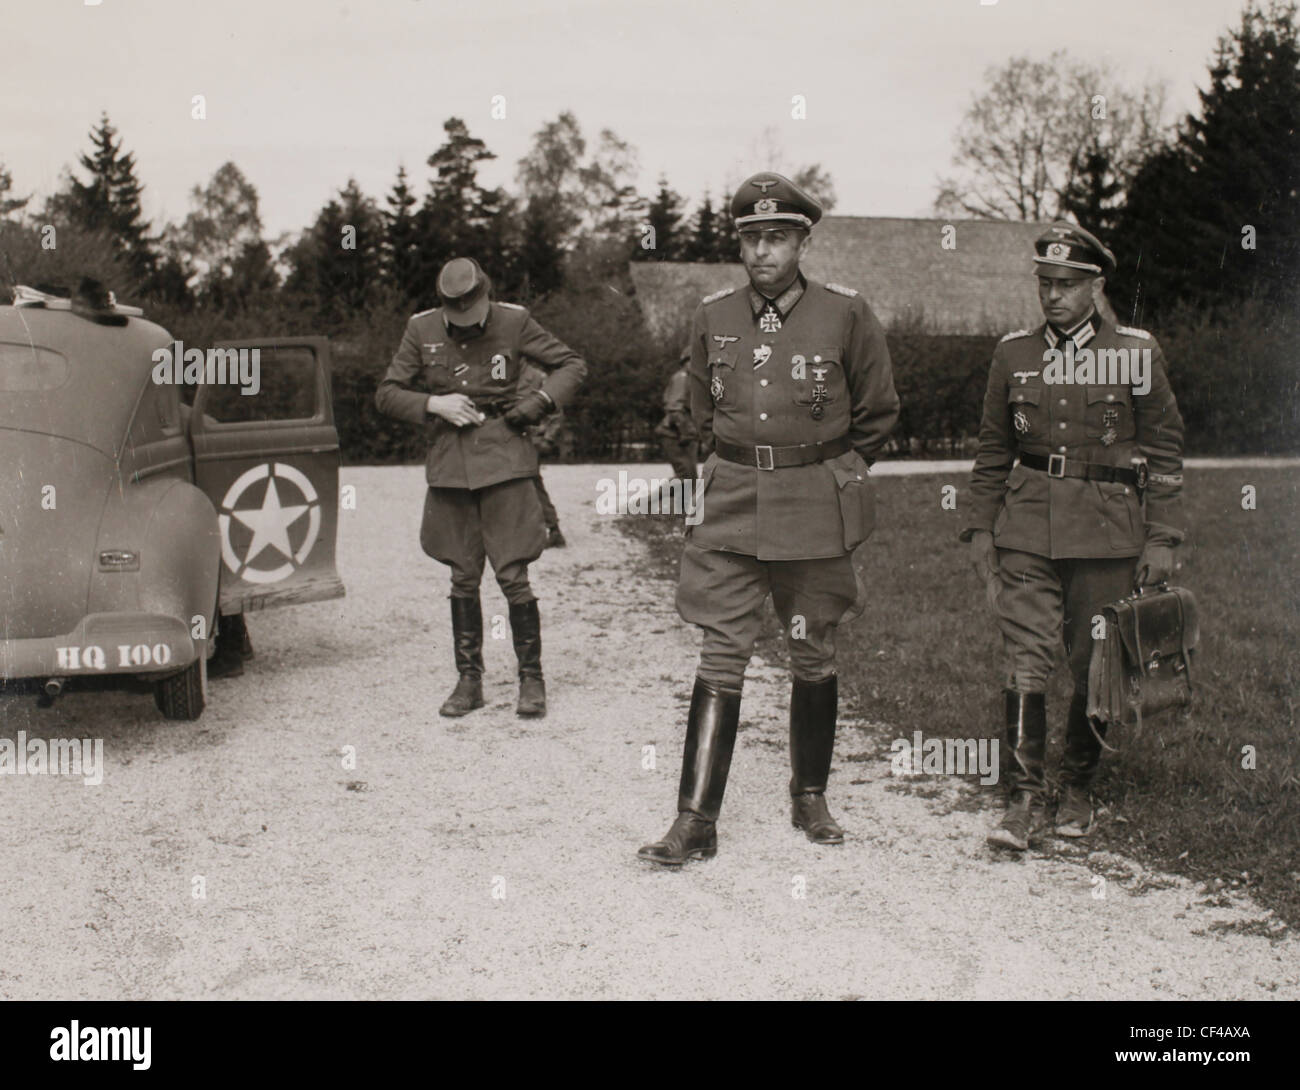 Nazi Generals from German Army Group G stand near a road and a car after their unconditional surrender during the last days of W Stock Photo